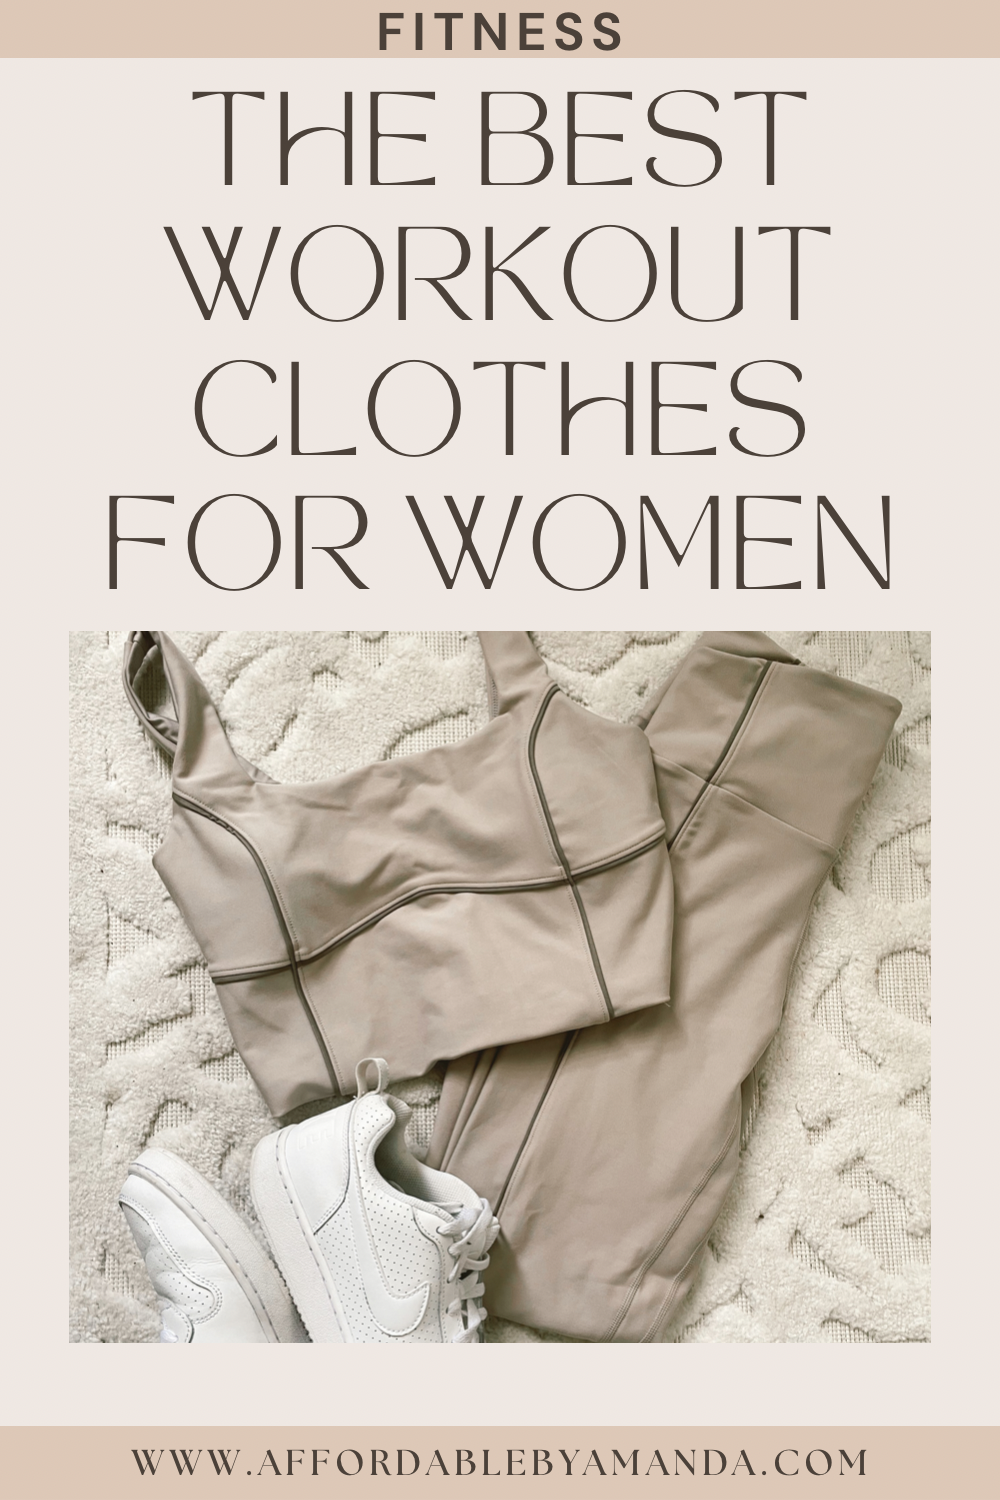 Workout Clothes for Women - Affordable by Amanda